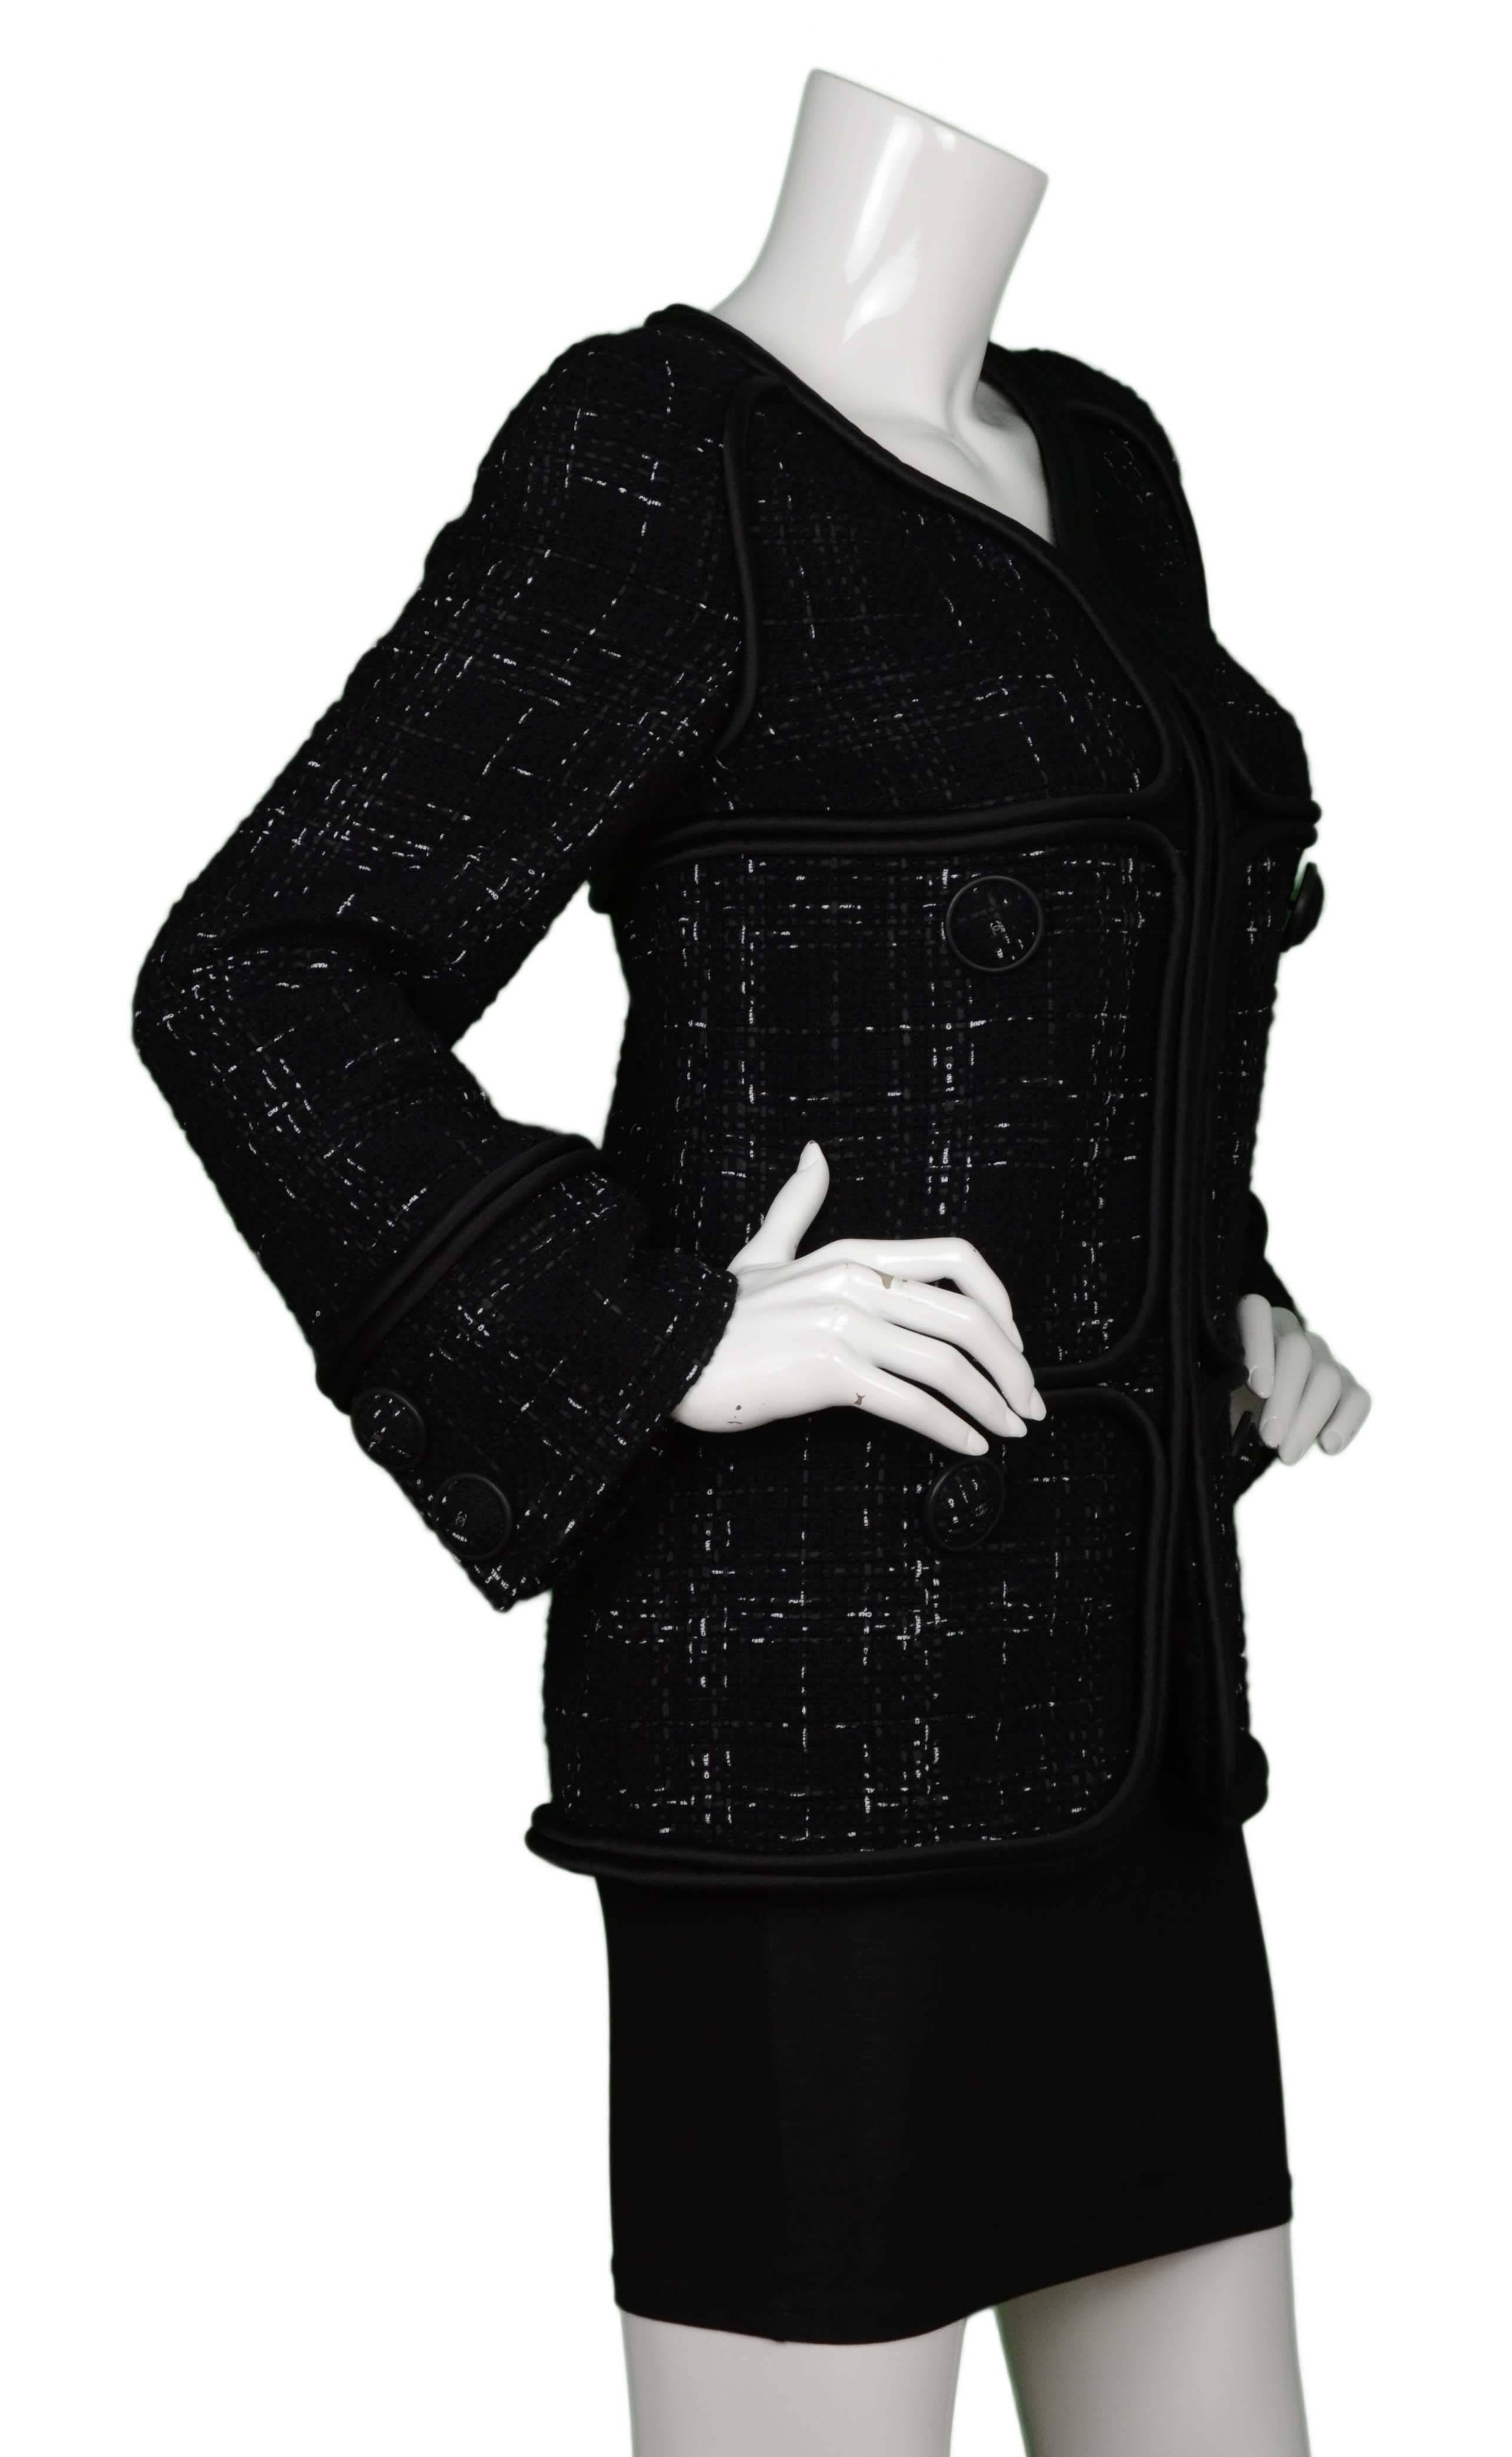 Features xl satin piping and black ribbon with Chanel in white print woven throughout jacket
Made In: France
Color: Black
Composition: 68% cotton, 21% wool, 11% polyester
Lining: Black, 100% silk
Closure/Opening: Front hook and eye